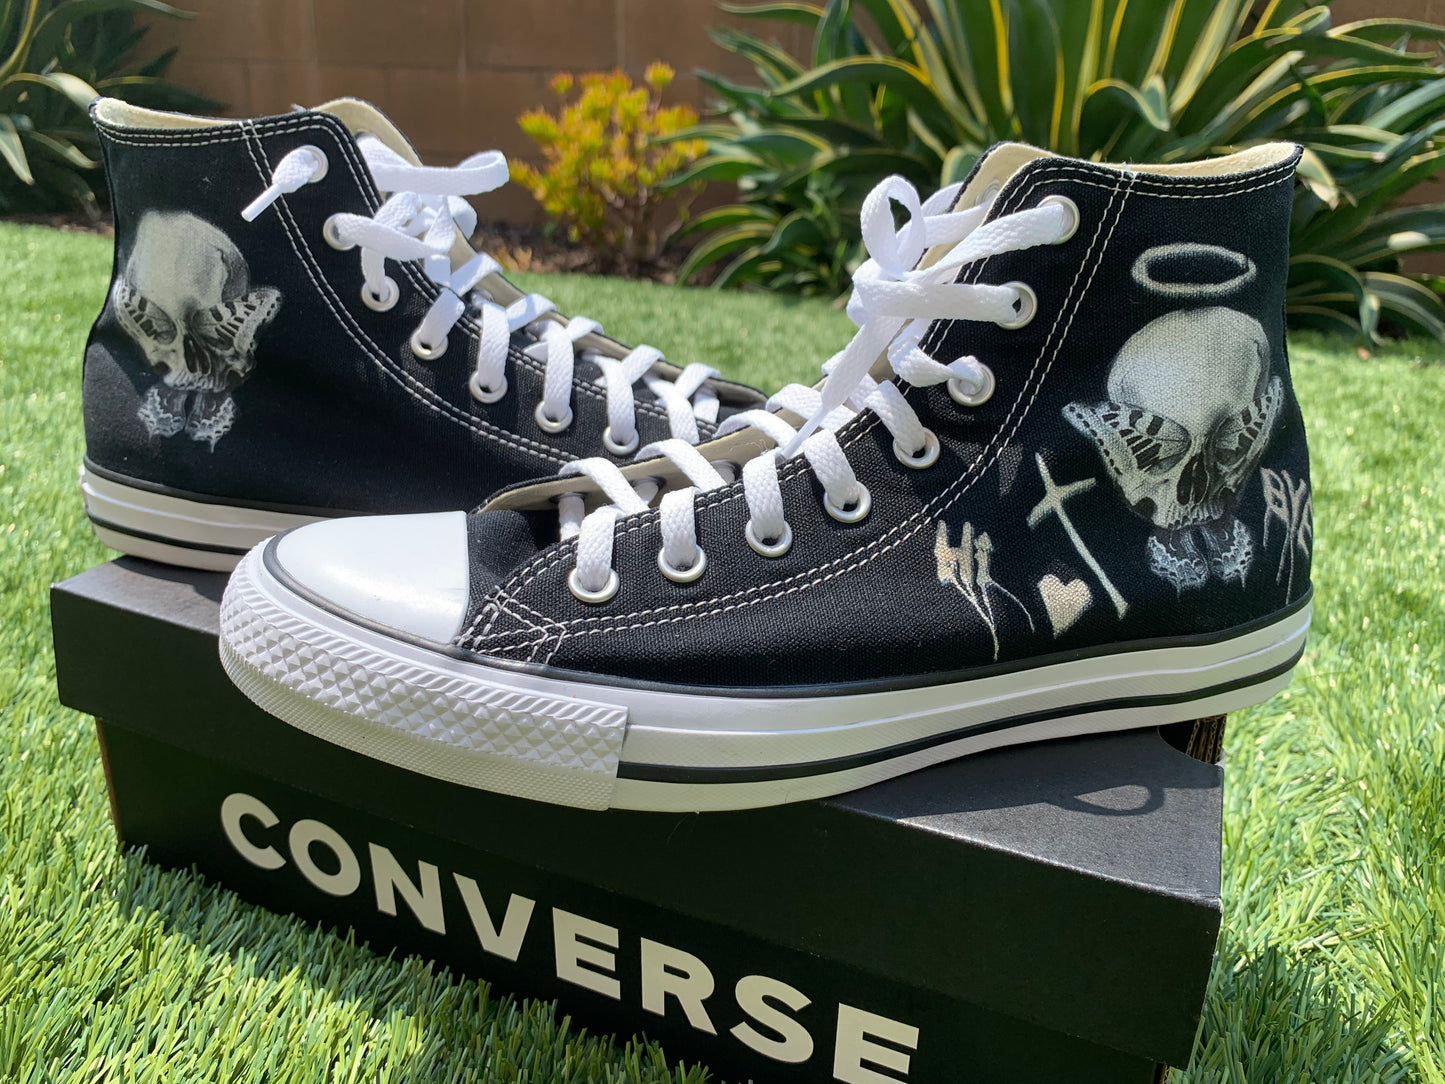 Consequential Clothing x Butterfly Effect Skull - Black High Top Converse